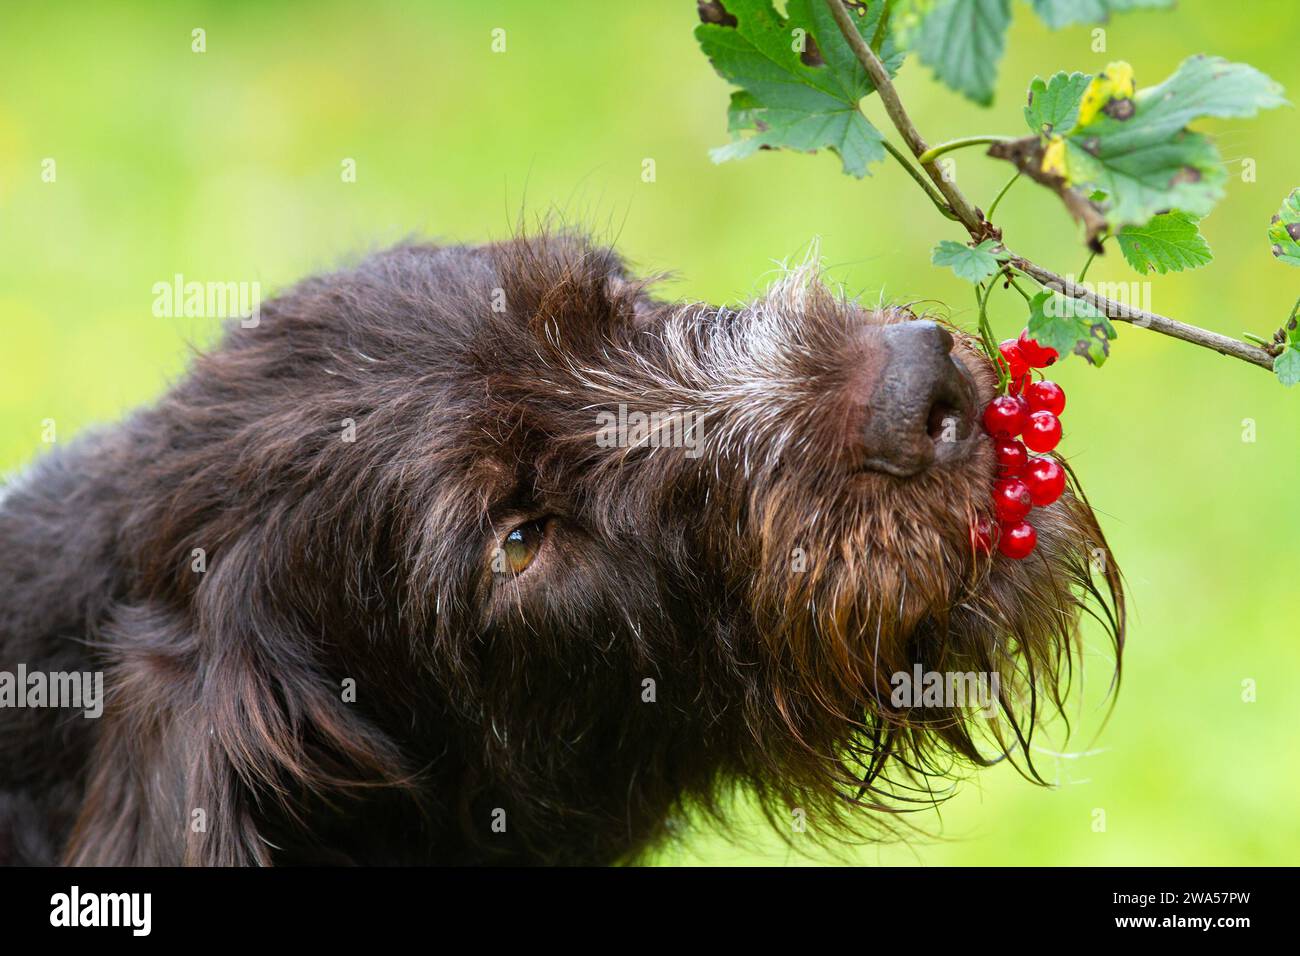 The dog eats red currant berries right from the branch. Close-up. Stock Photo